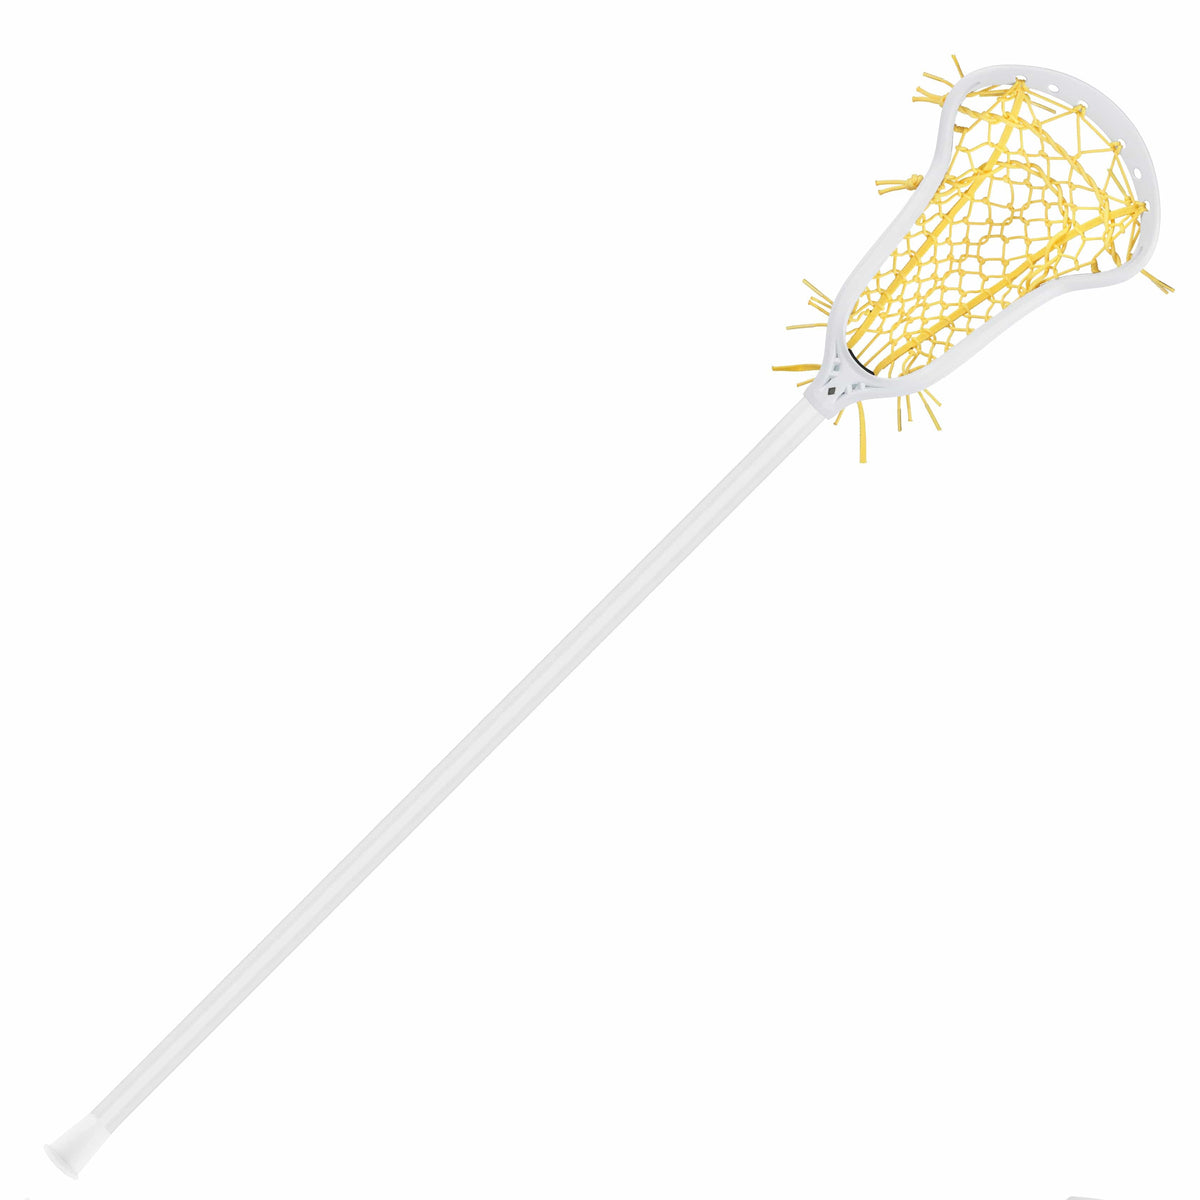 StringKing Womens Complete Sticks White/Yellow StringKing Womens Complete 2 Pro Defense Lacrosse Stick With Tech Trad and Composite Pro Shaft from Lacrosse Fanatic